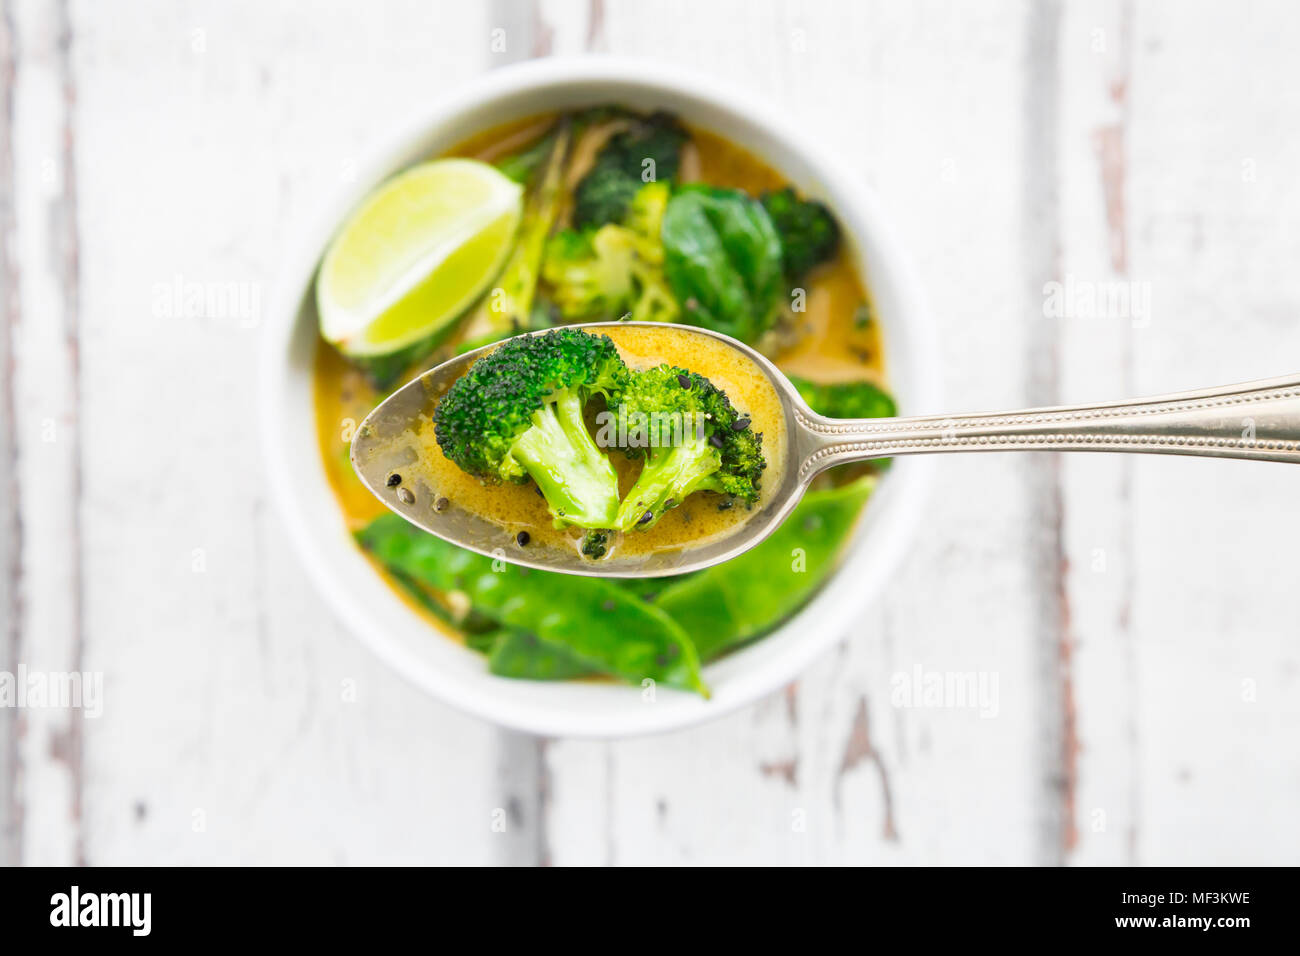 Green thai curry with broccoli, pak choi, snow peas, baby spinach, lime, broccoli and sauce on spoon Stock Photo